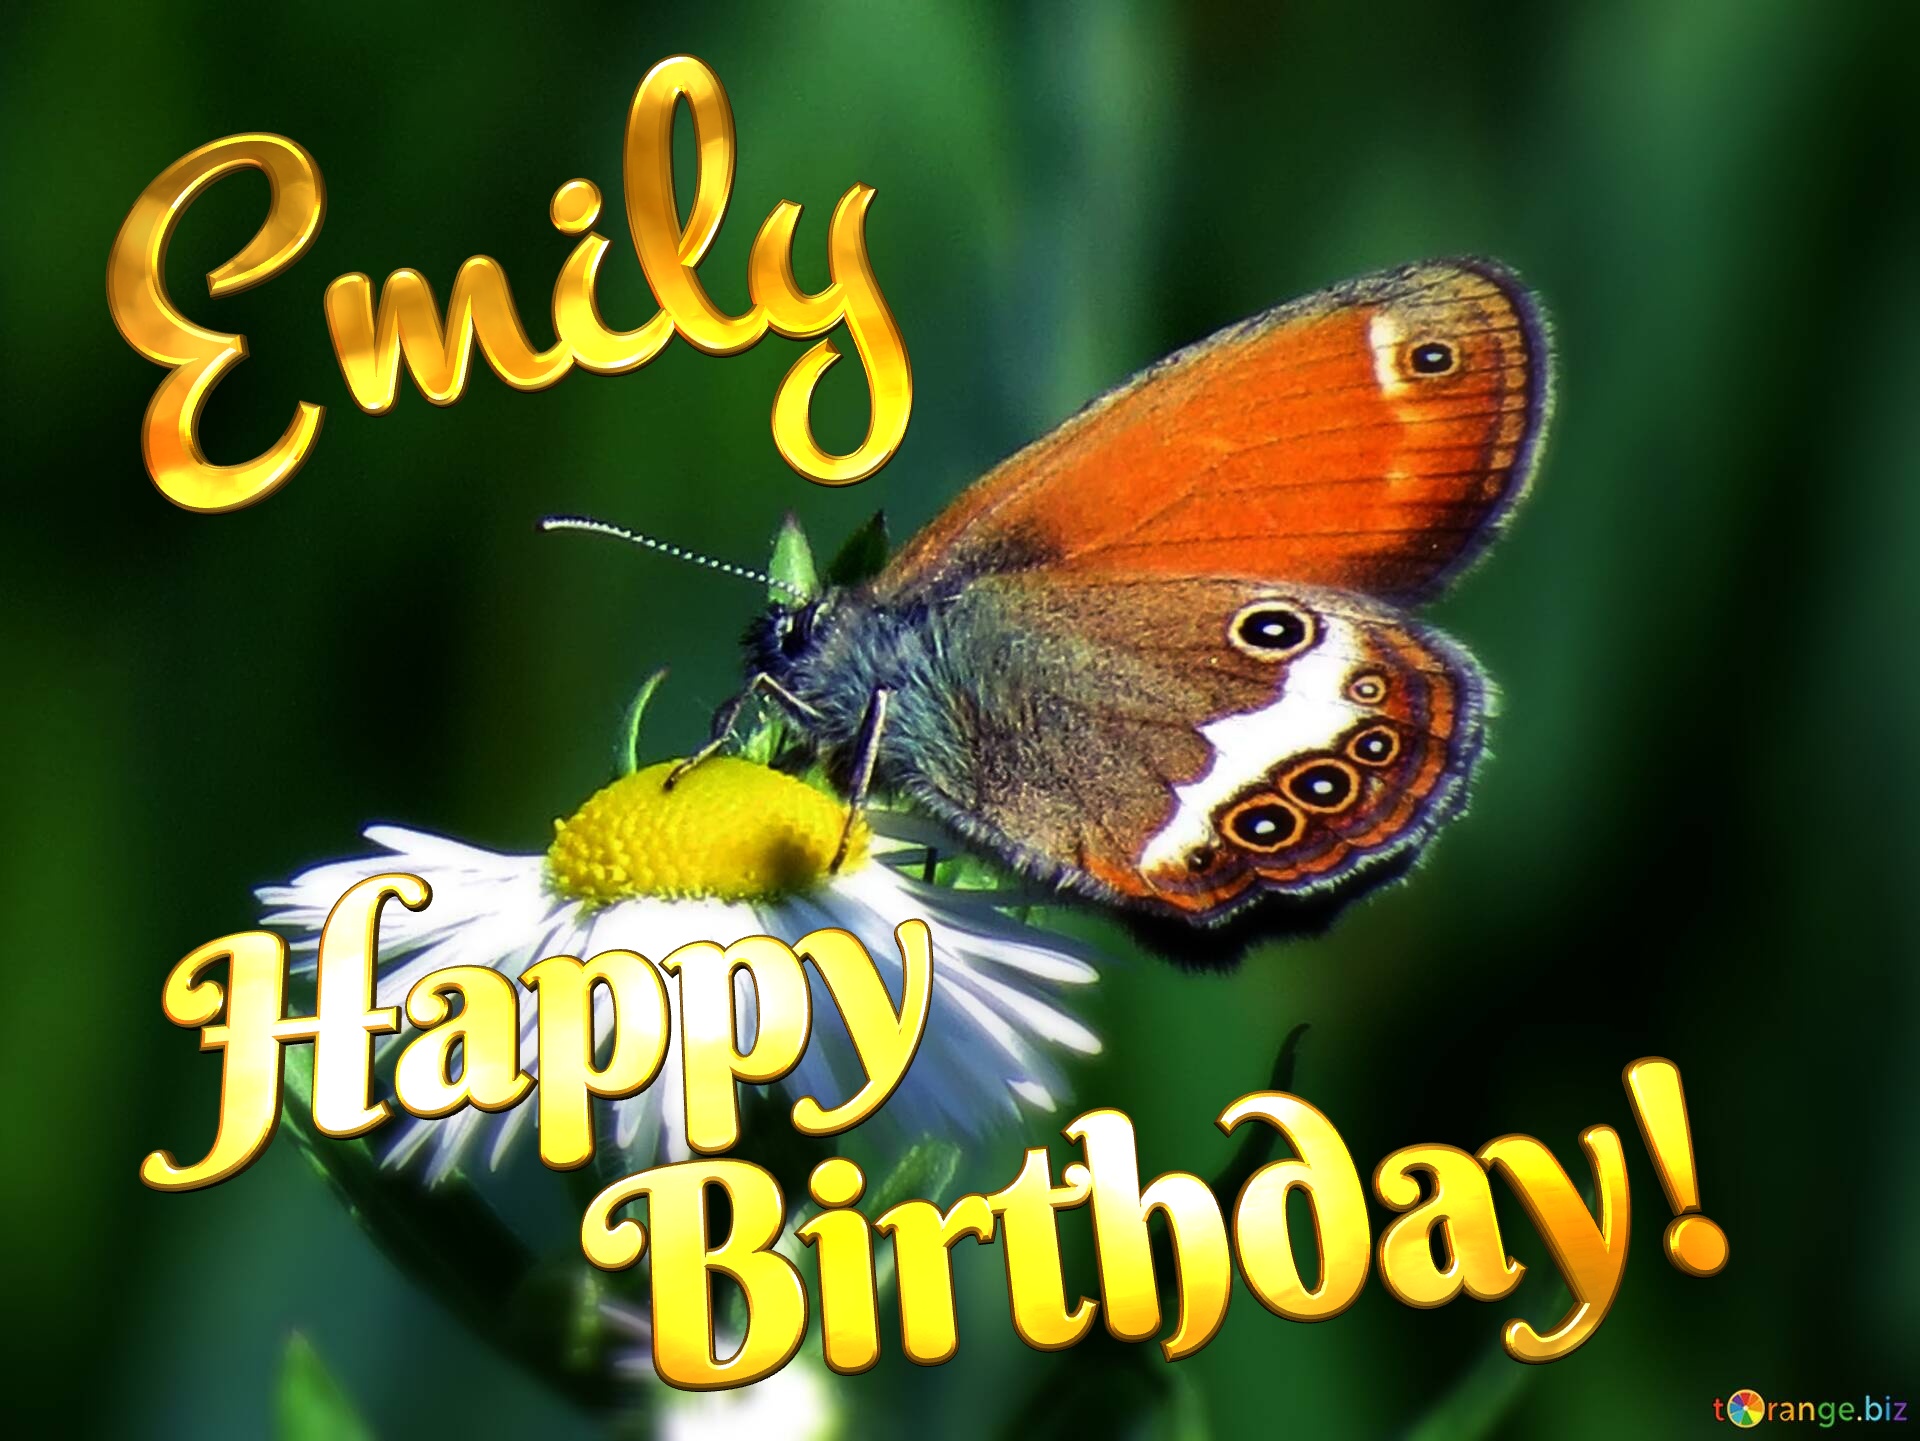 Emily Happy Birthday! Butterfly on flower  profile image №0